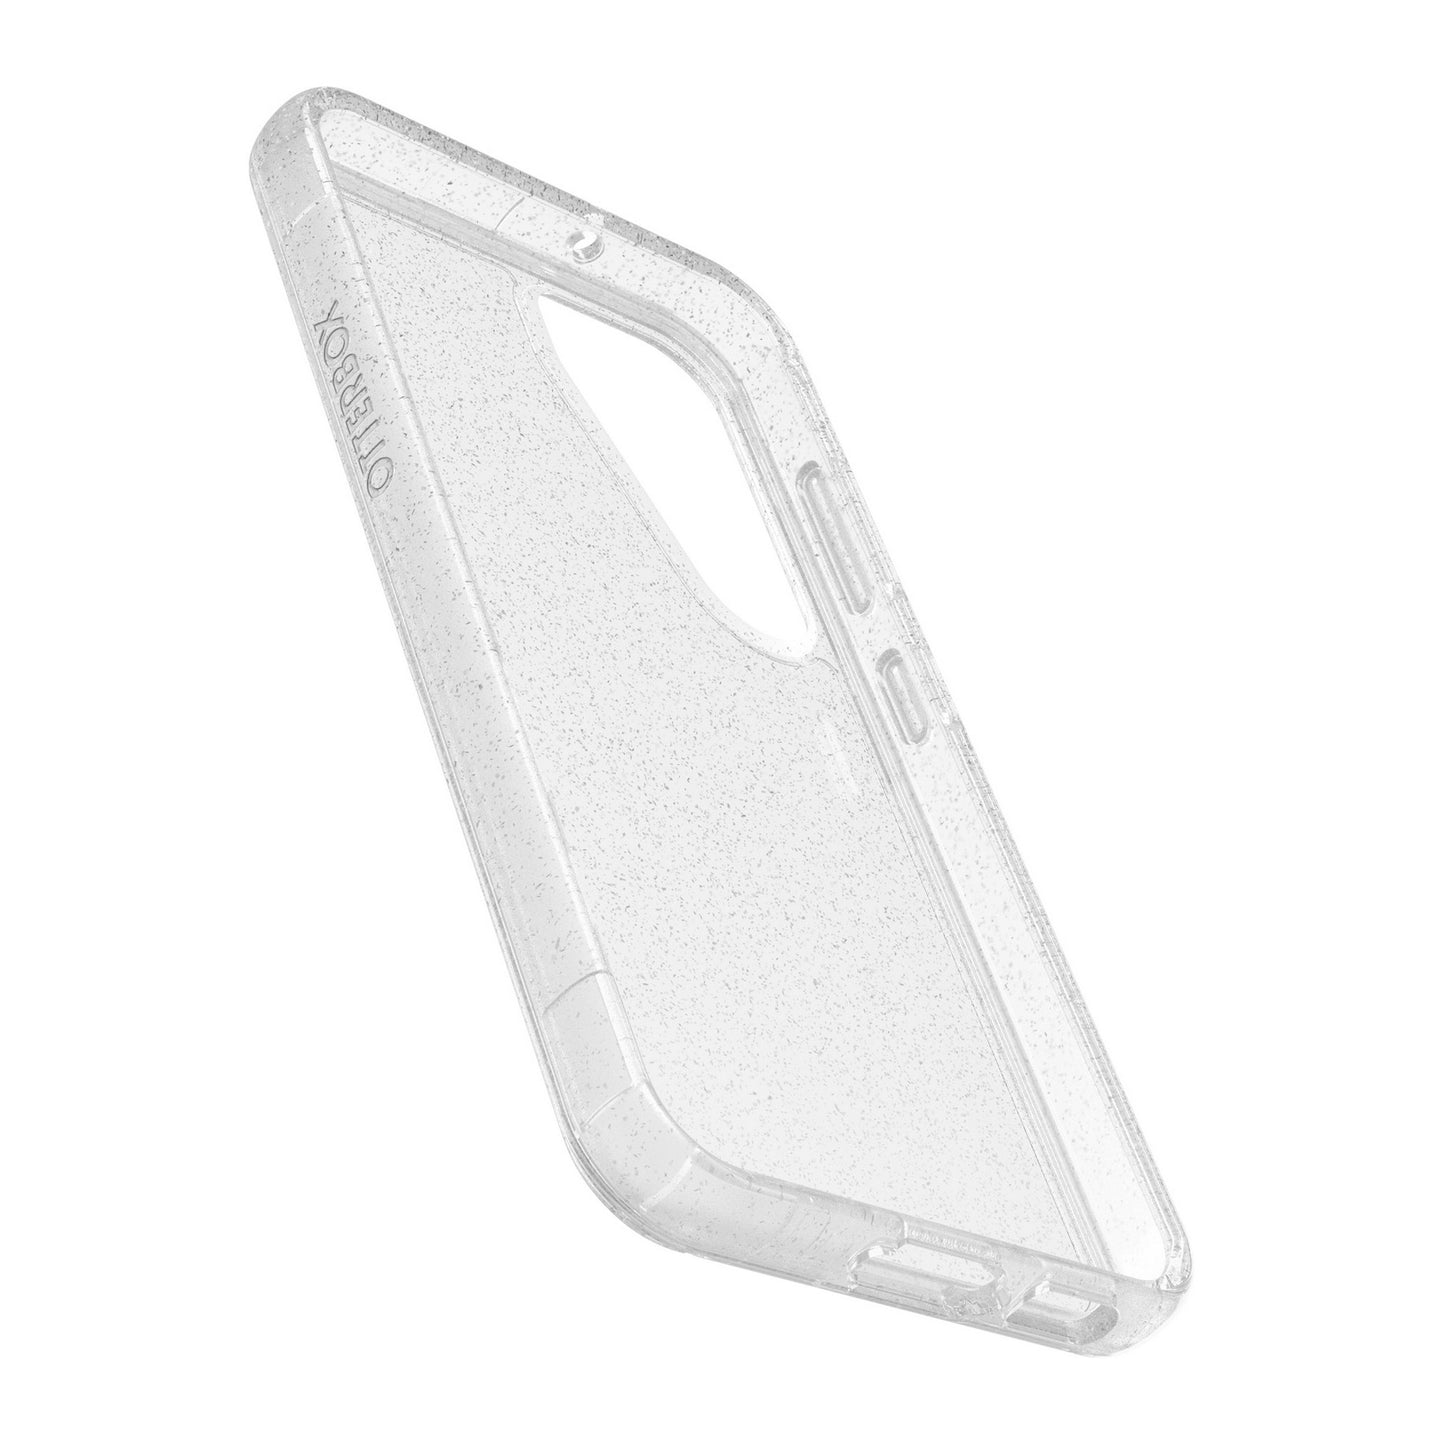 Samsung Galaxy S23 5G Otterbox Symmetry Clear Series Case - Clear/Silver (Stardust) - 15-10819